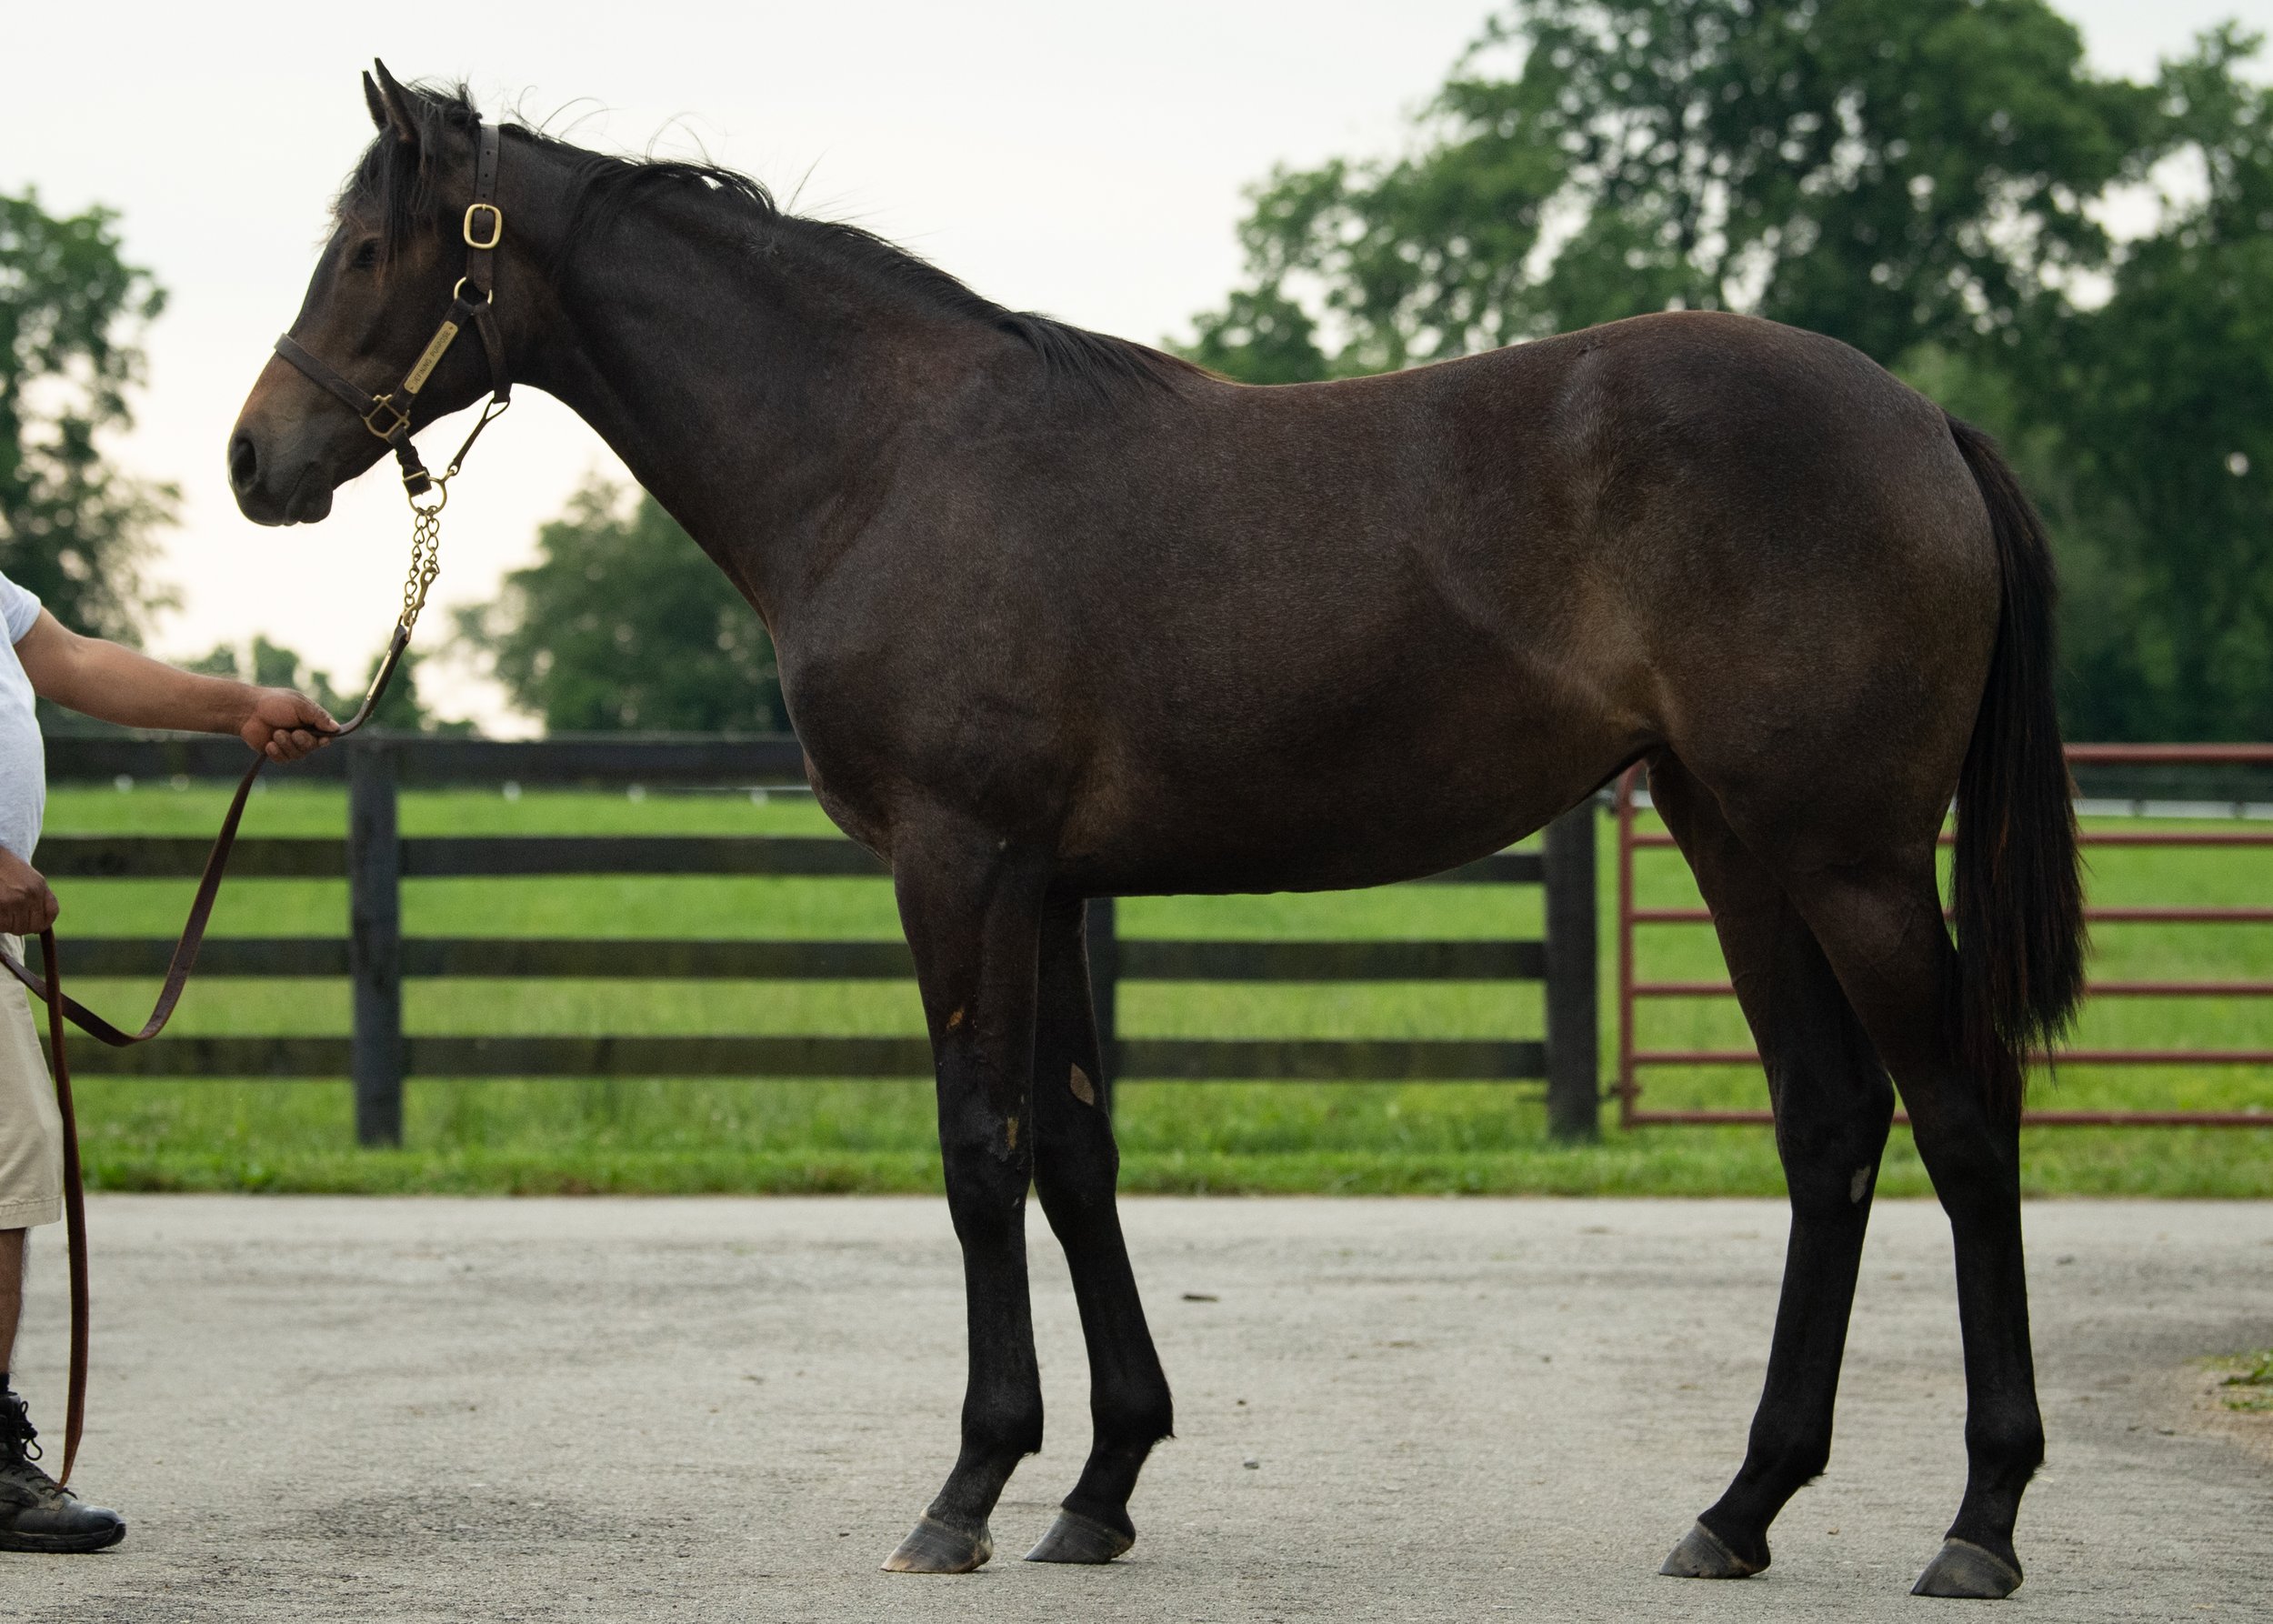 Defining Purpose on the farm as a yearling